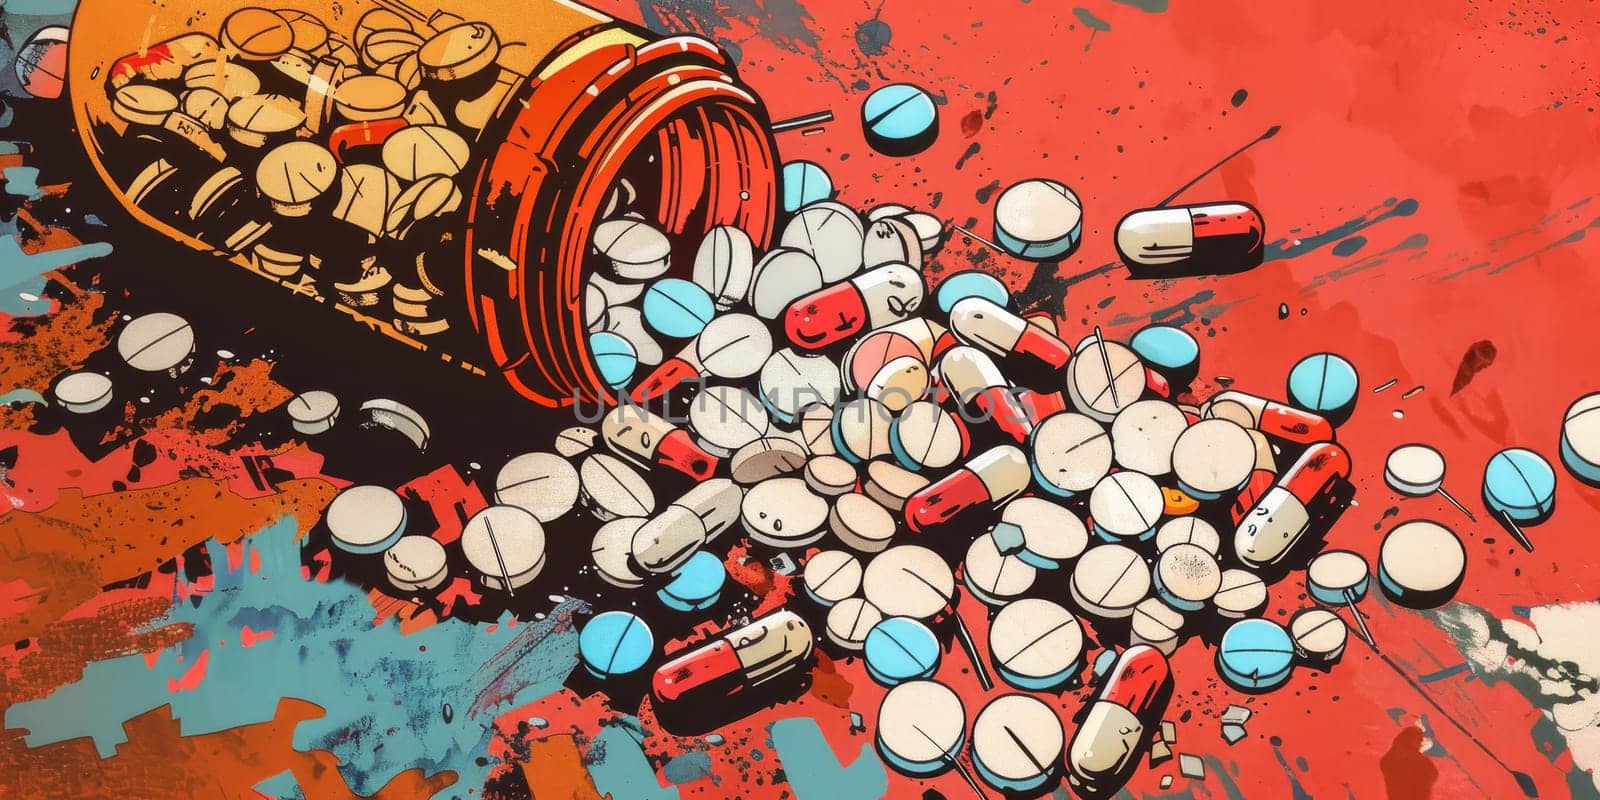 Pills pouring out of an open container, scattered on surface